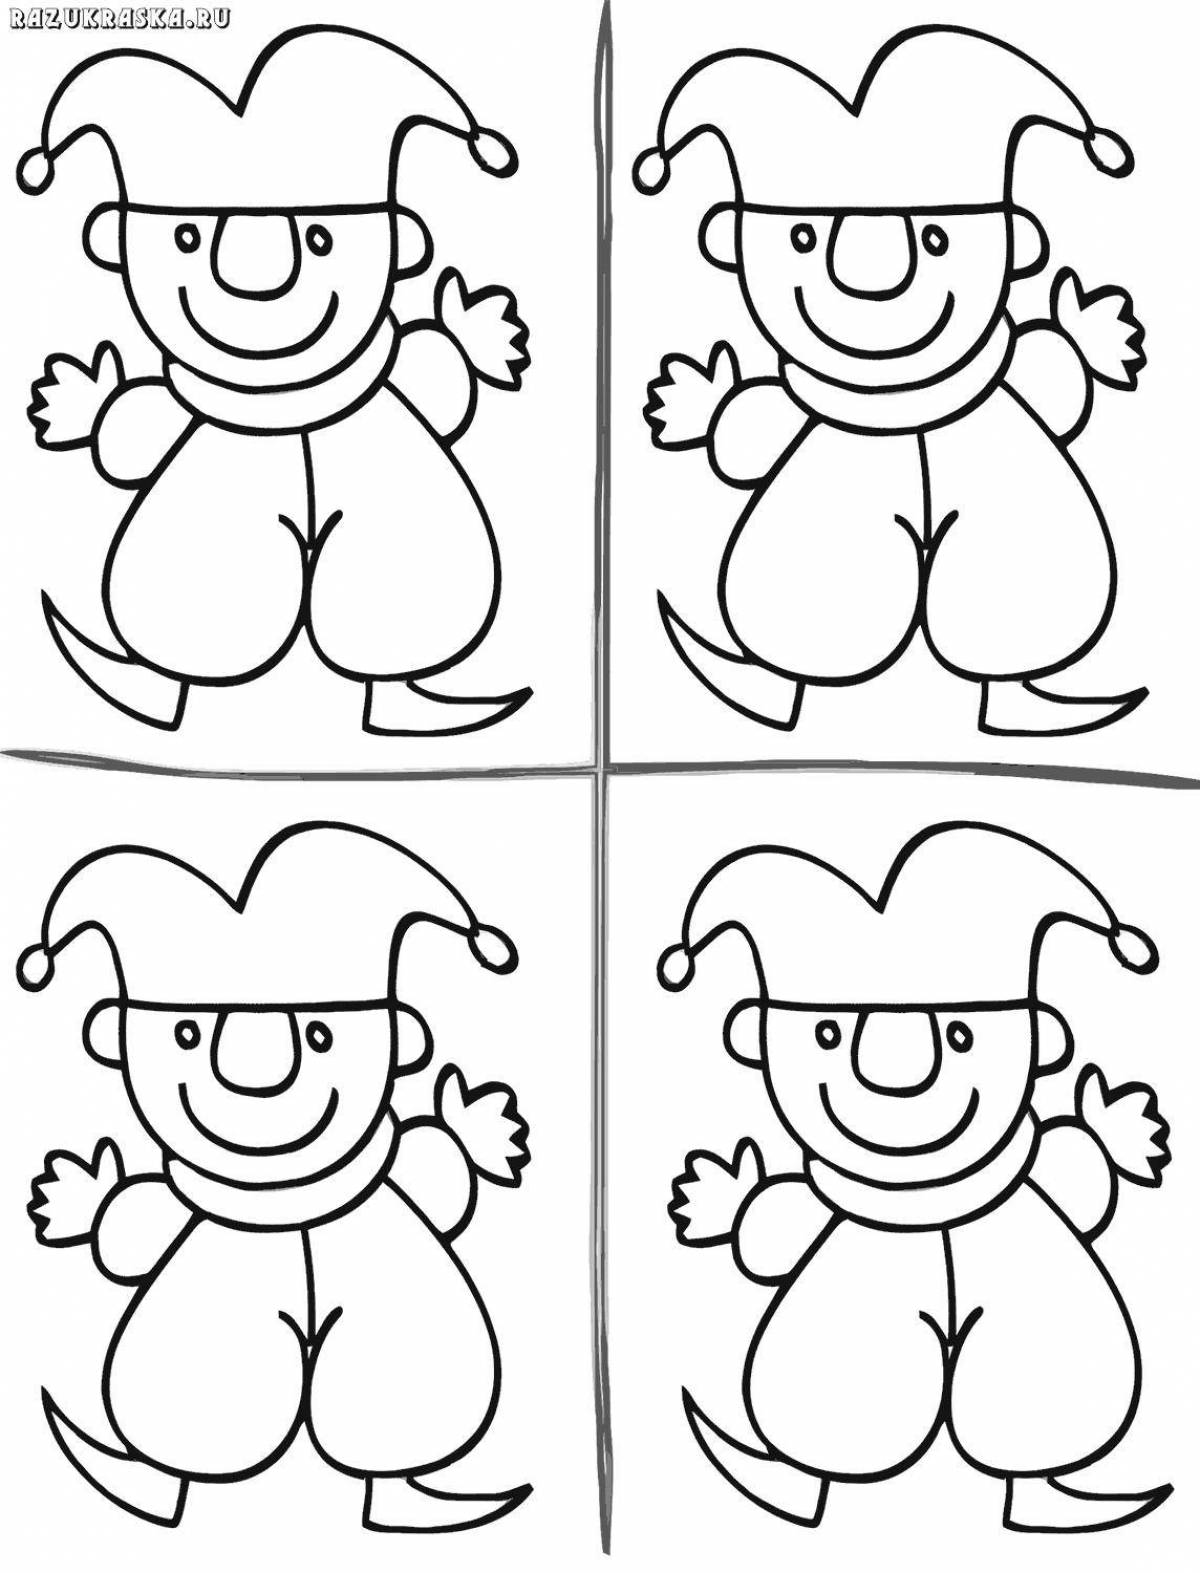 Charming parsley coloring page